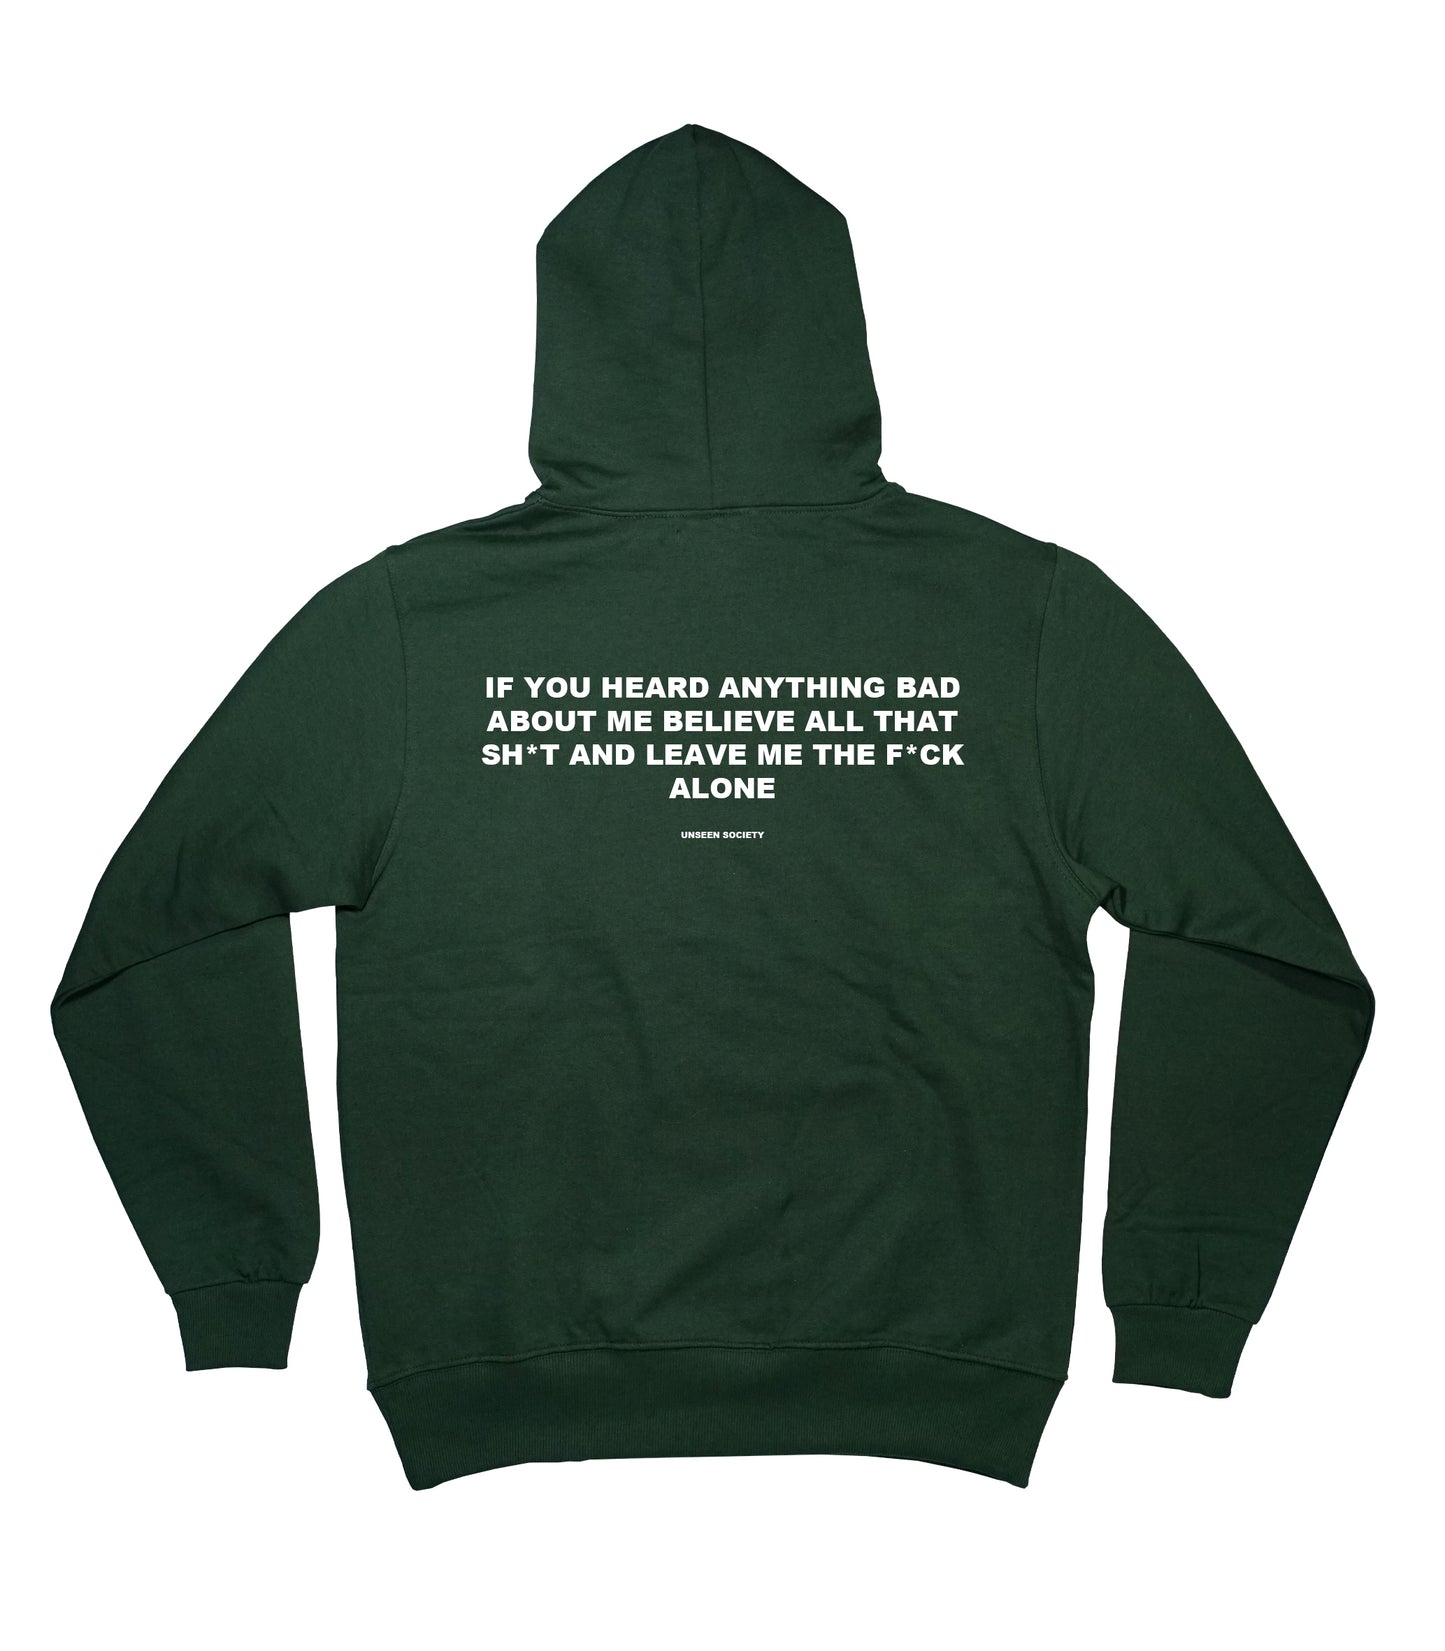 Leave me alone quote hoodie